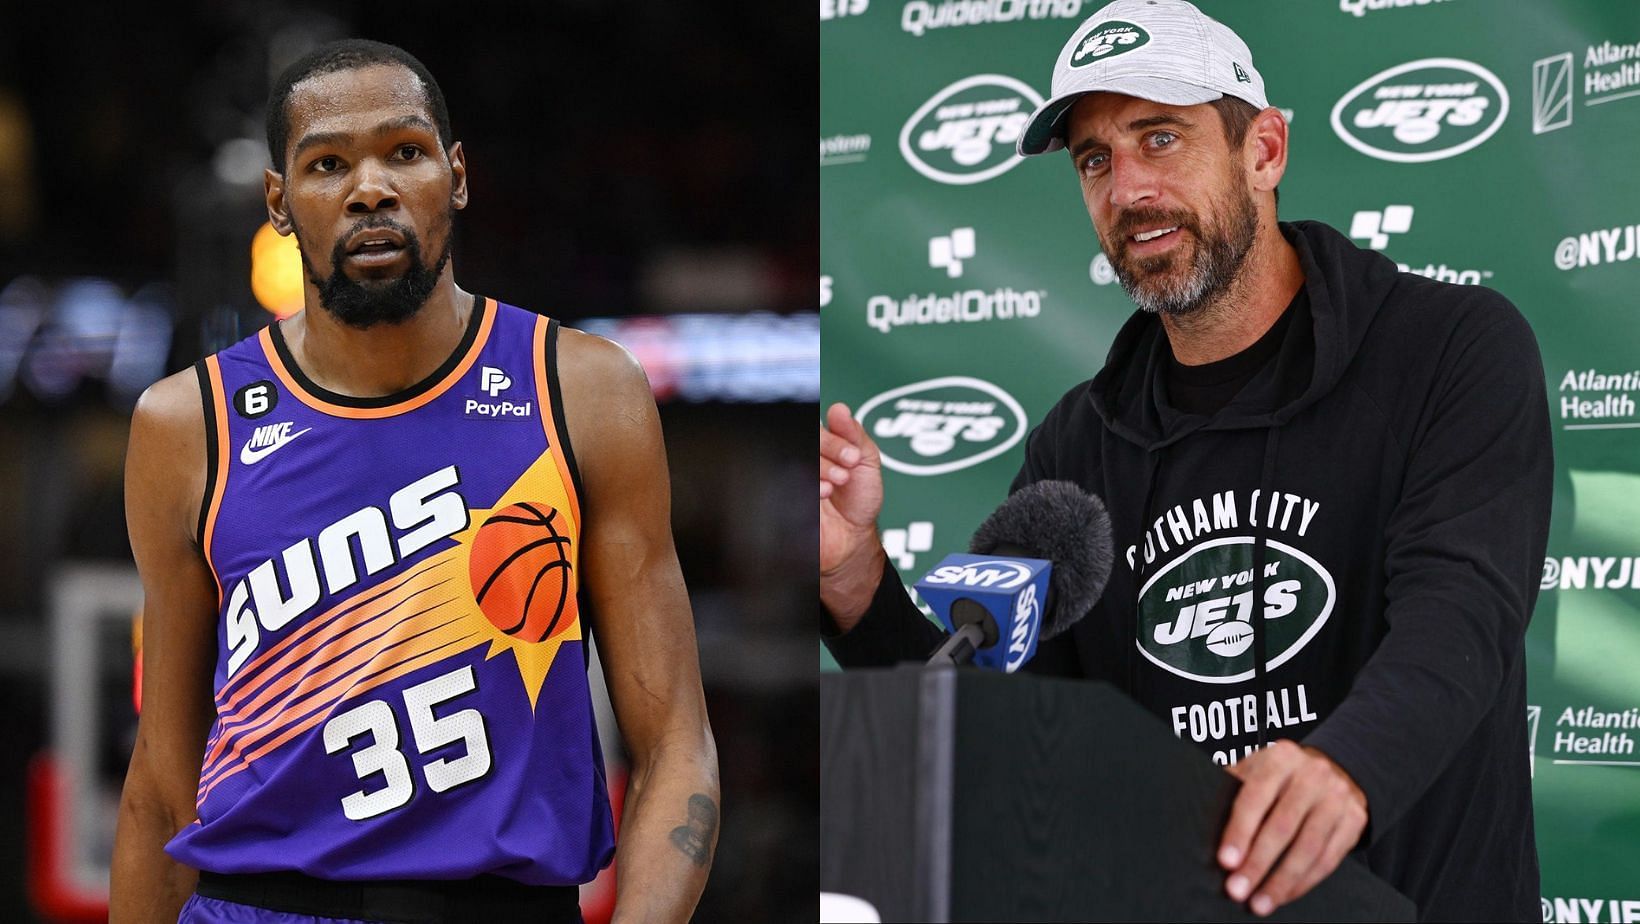 Aaron Rodgers had the same injury as Kevin Durant in 2019